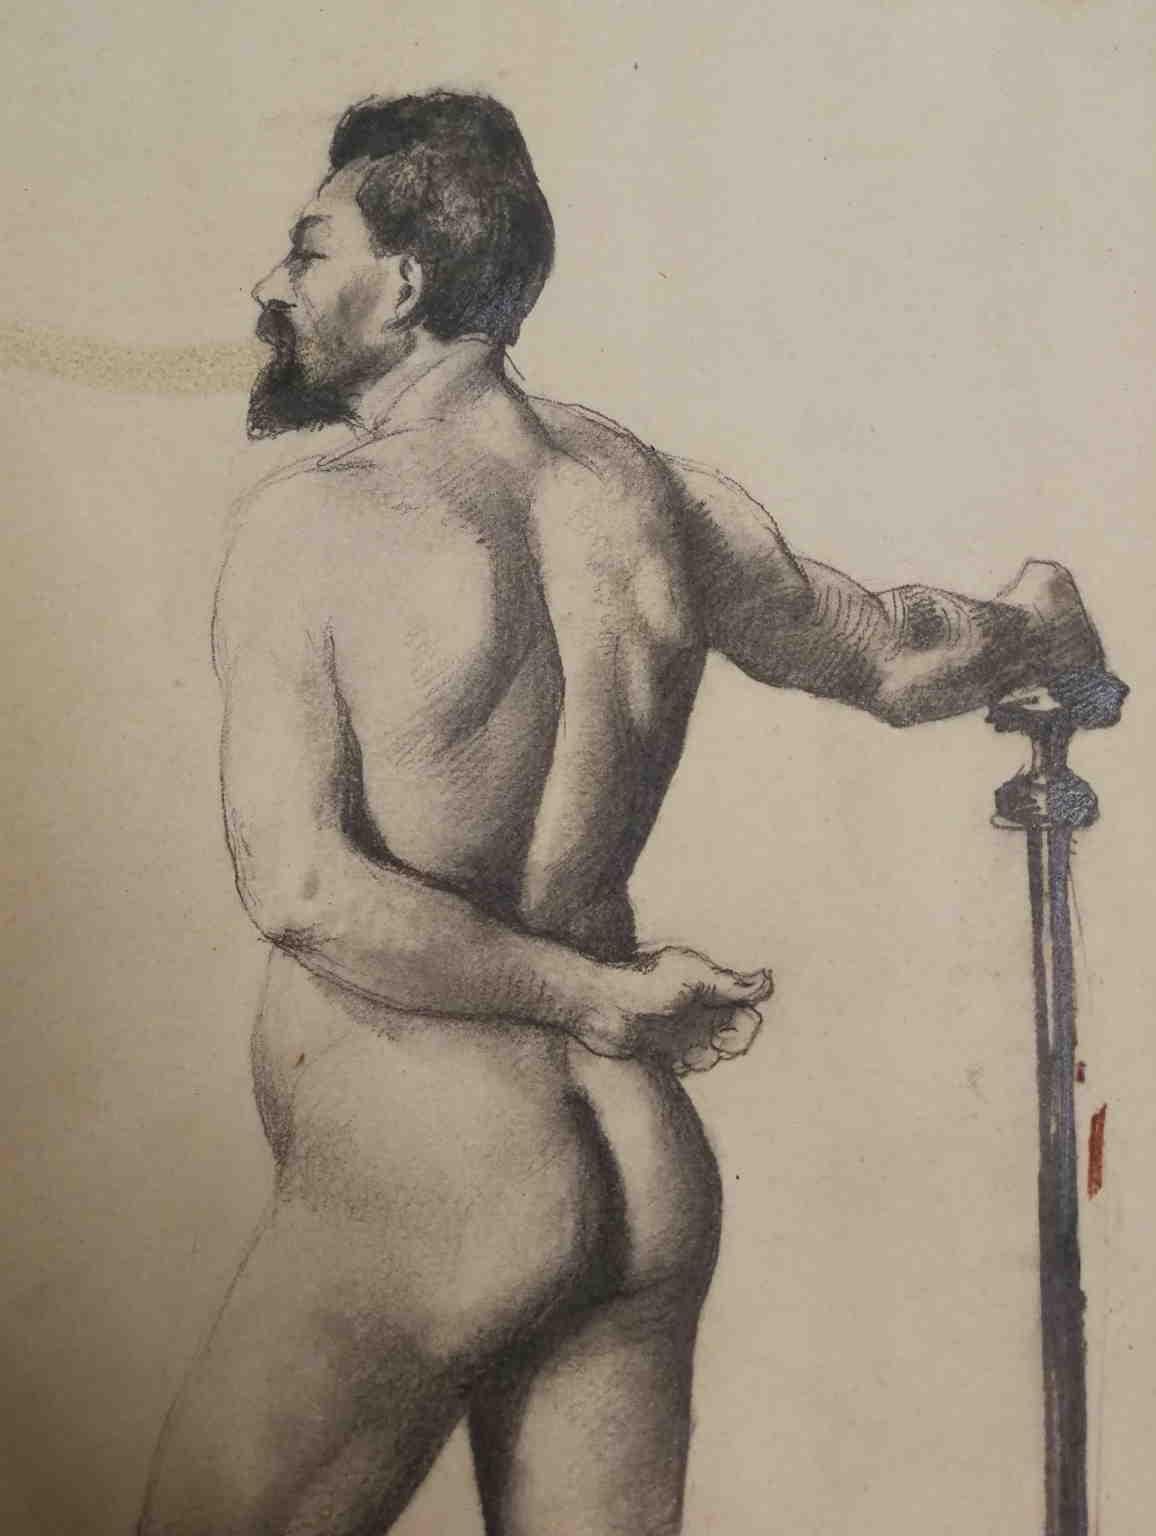 Signed dated Tuscan Banti Male Nude Academy Drawing 19th century pencil paper  - Other Art Style Art by Arturo Banti